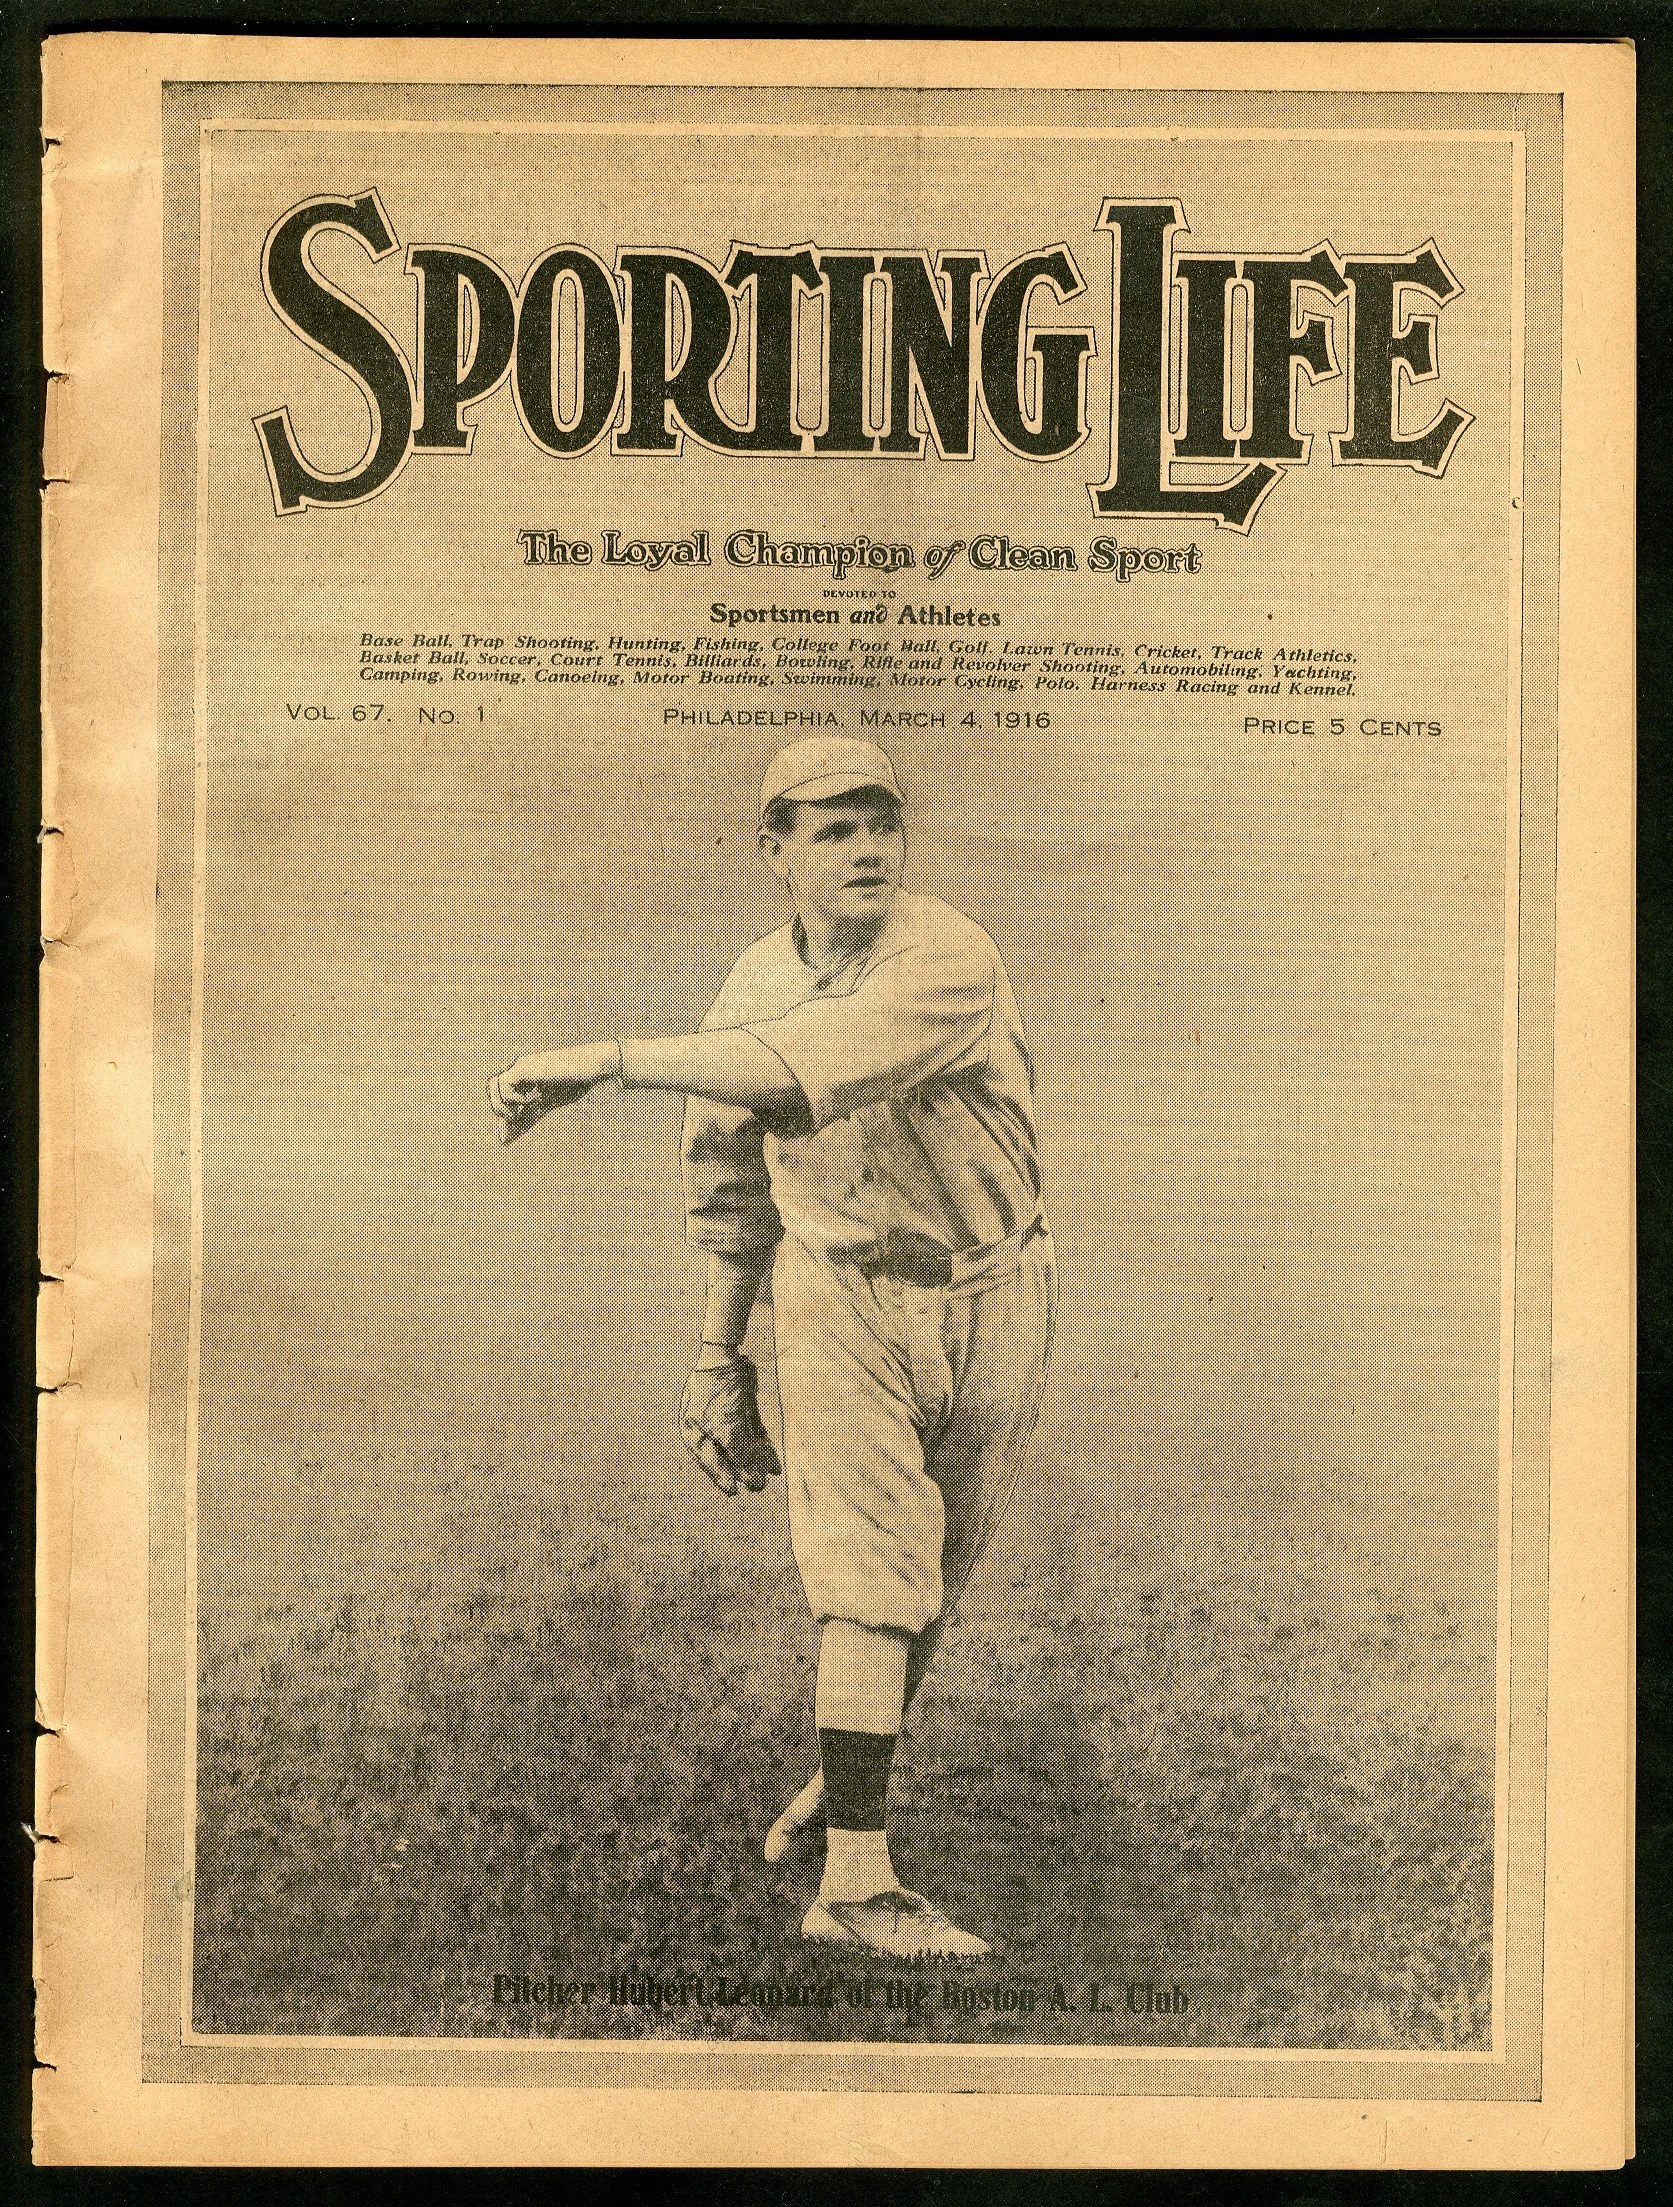 1916 Sporting Life Magazine "Isn't that Babe Ruth?" Cover